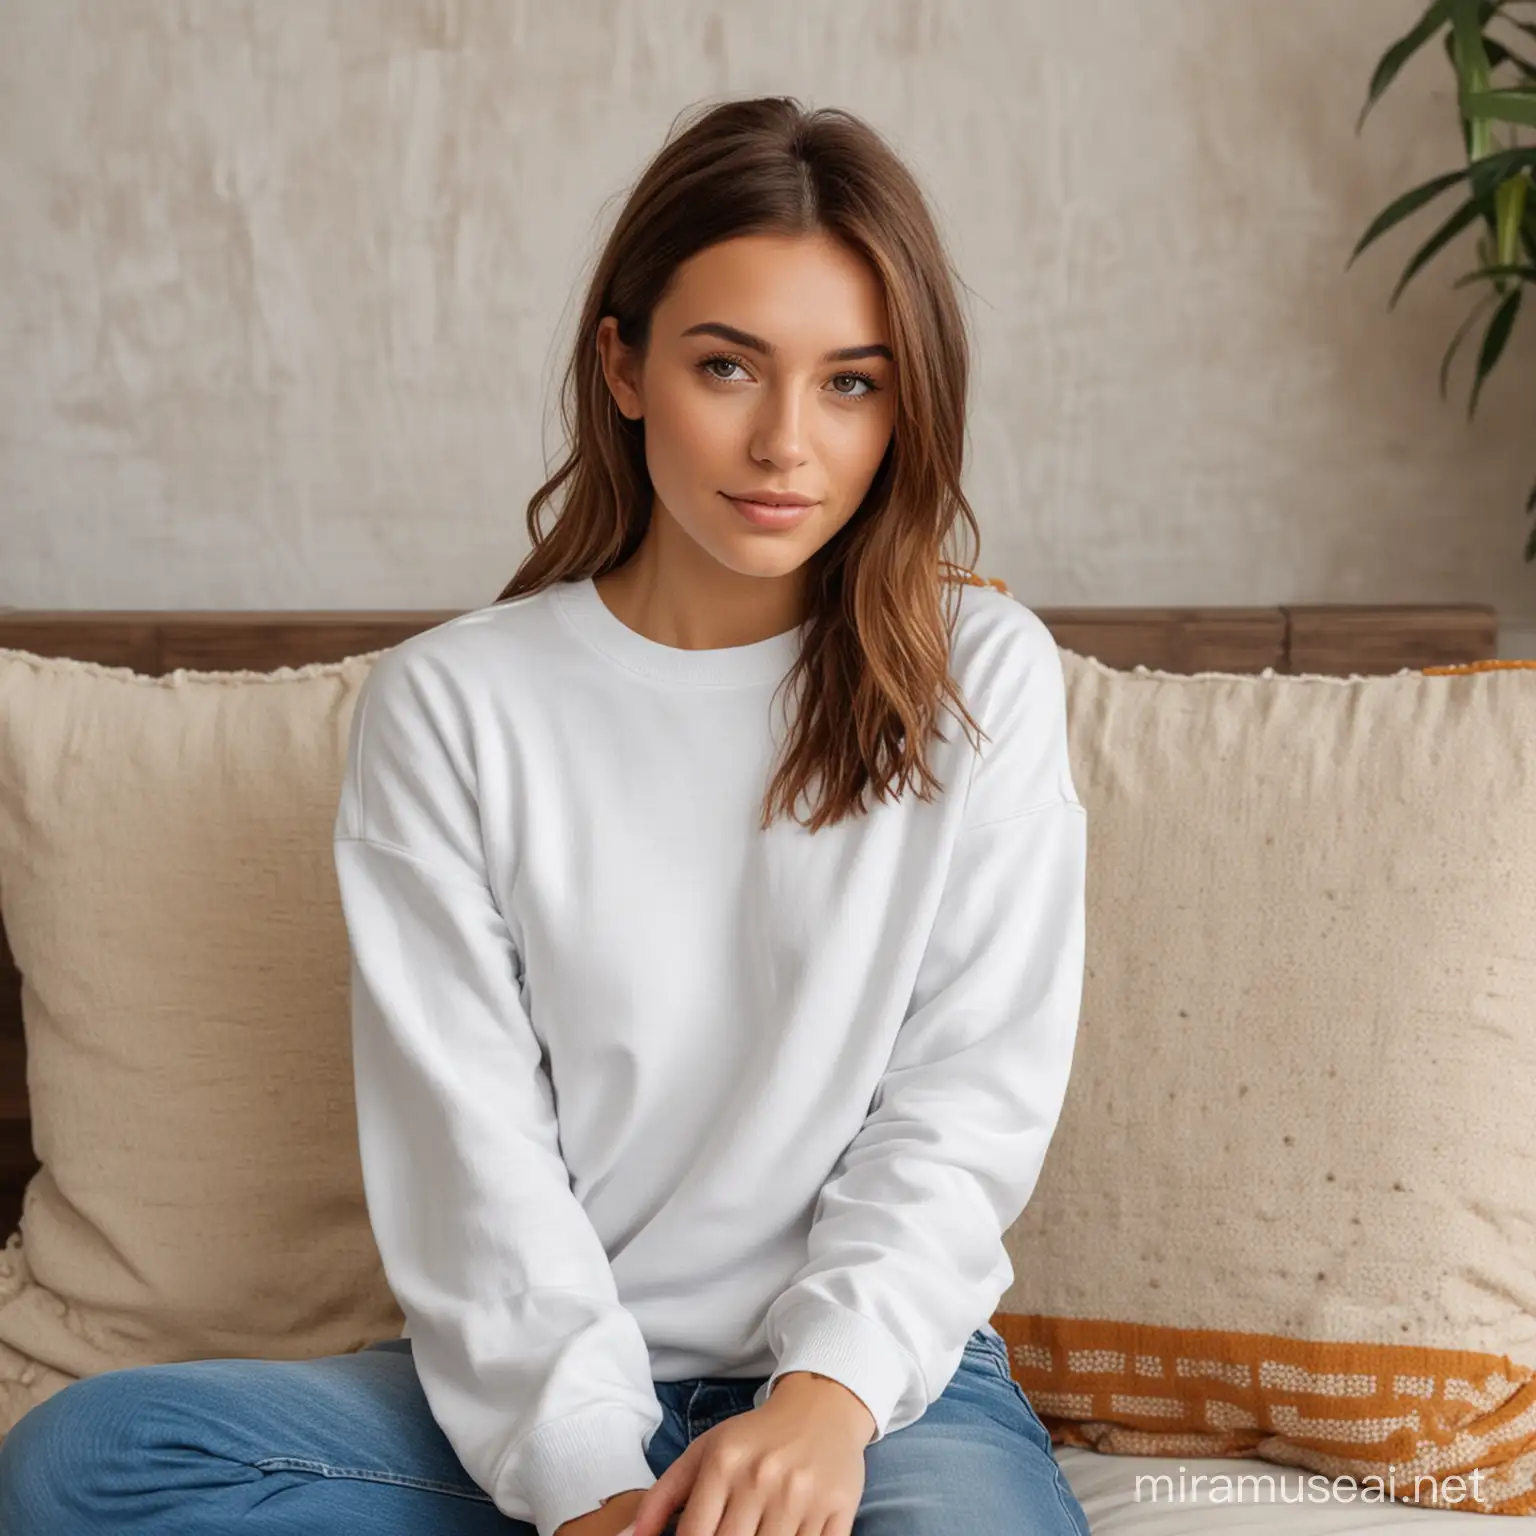 Boho Style Portrait of Young Woman with Brown Hair and Crewneck Sweatshirt